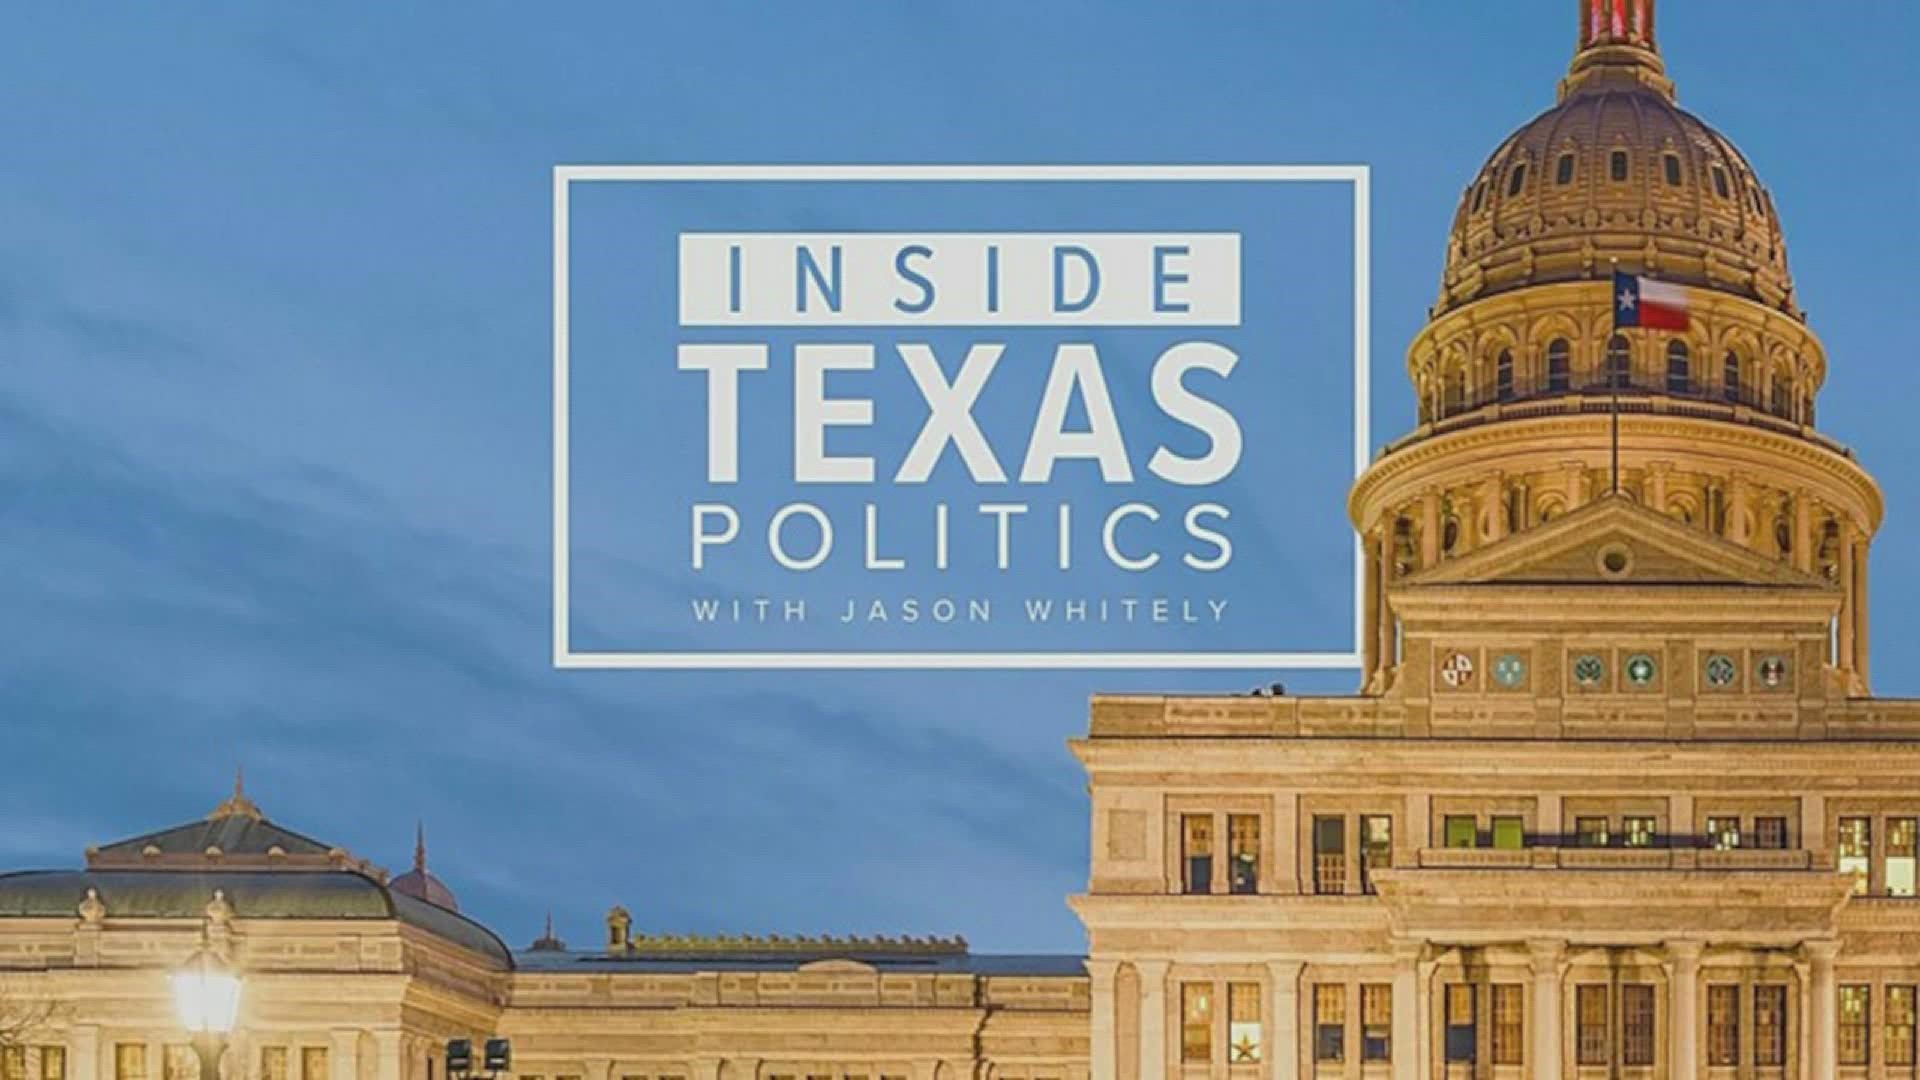 Plus: Is this the year Texas lawmakers eliminate the STAAR test from public schools? What about Democrats in Congress who are pushing to pass the George Floyd Act?